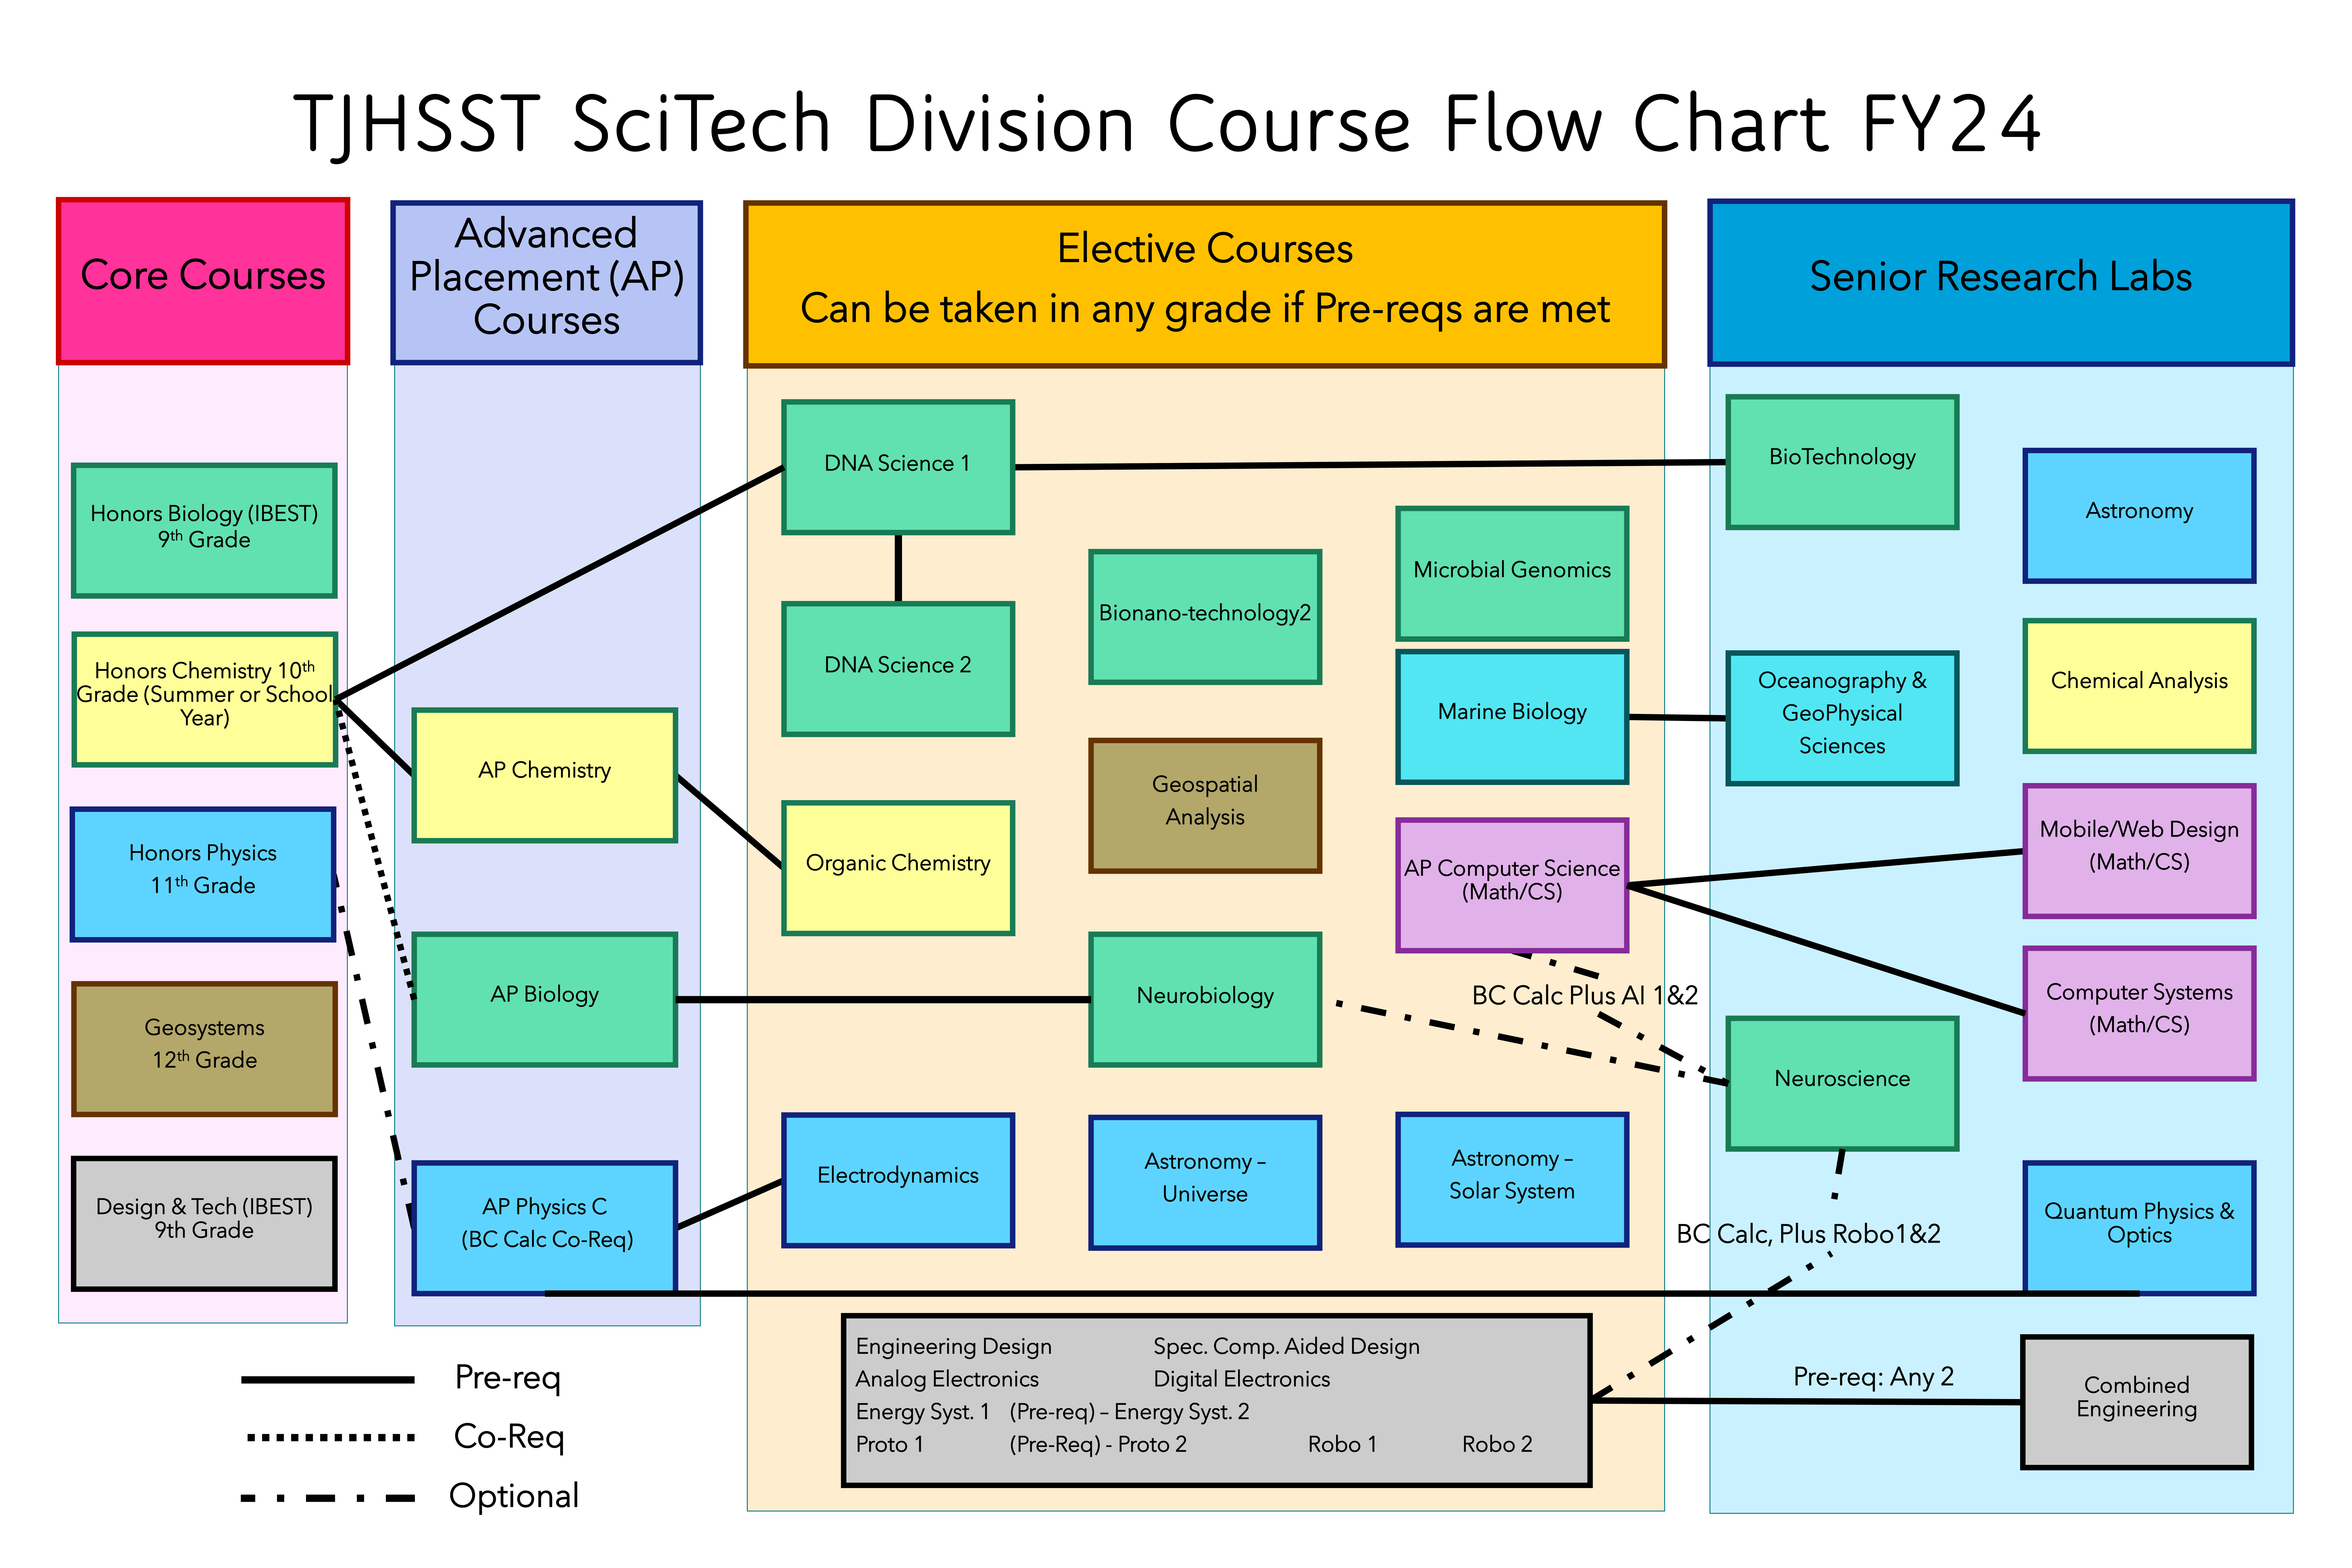 Flow chart of Science and Technology courses at TJHSST for 2023-24 school year